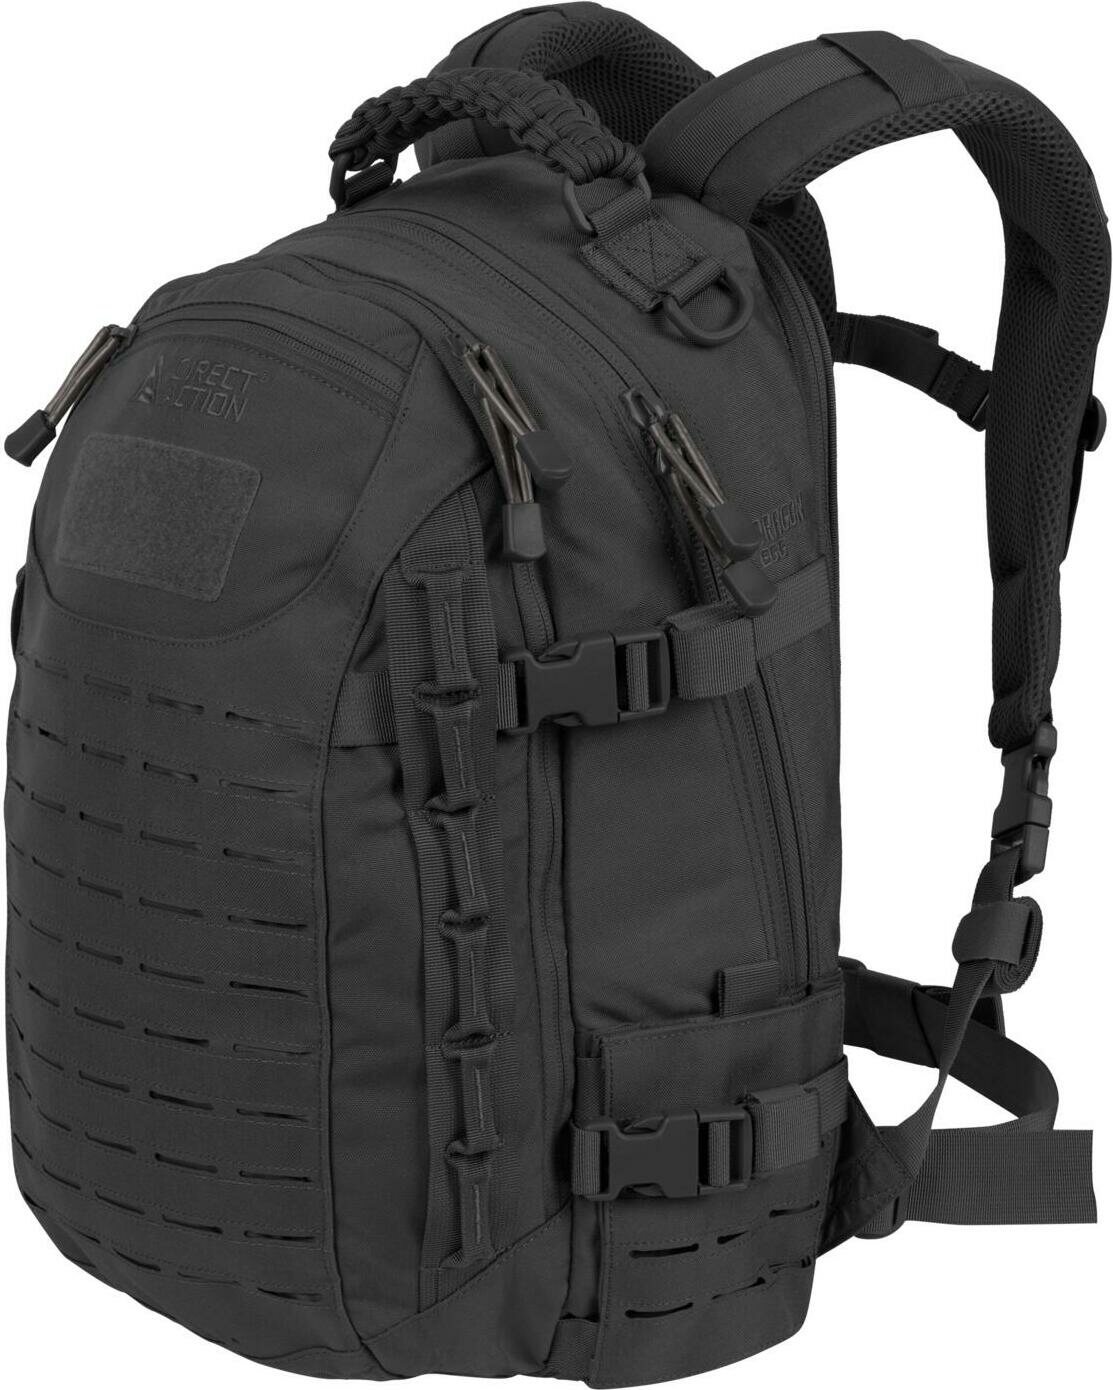 Direct Action Gear Dragon Egg MK II Backpack | Military reput ...